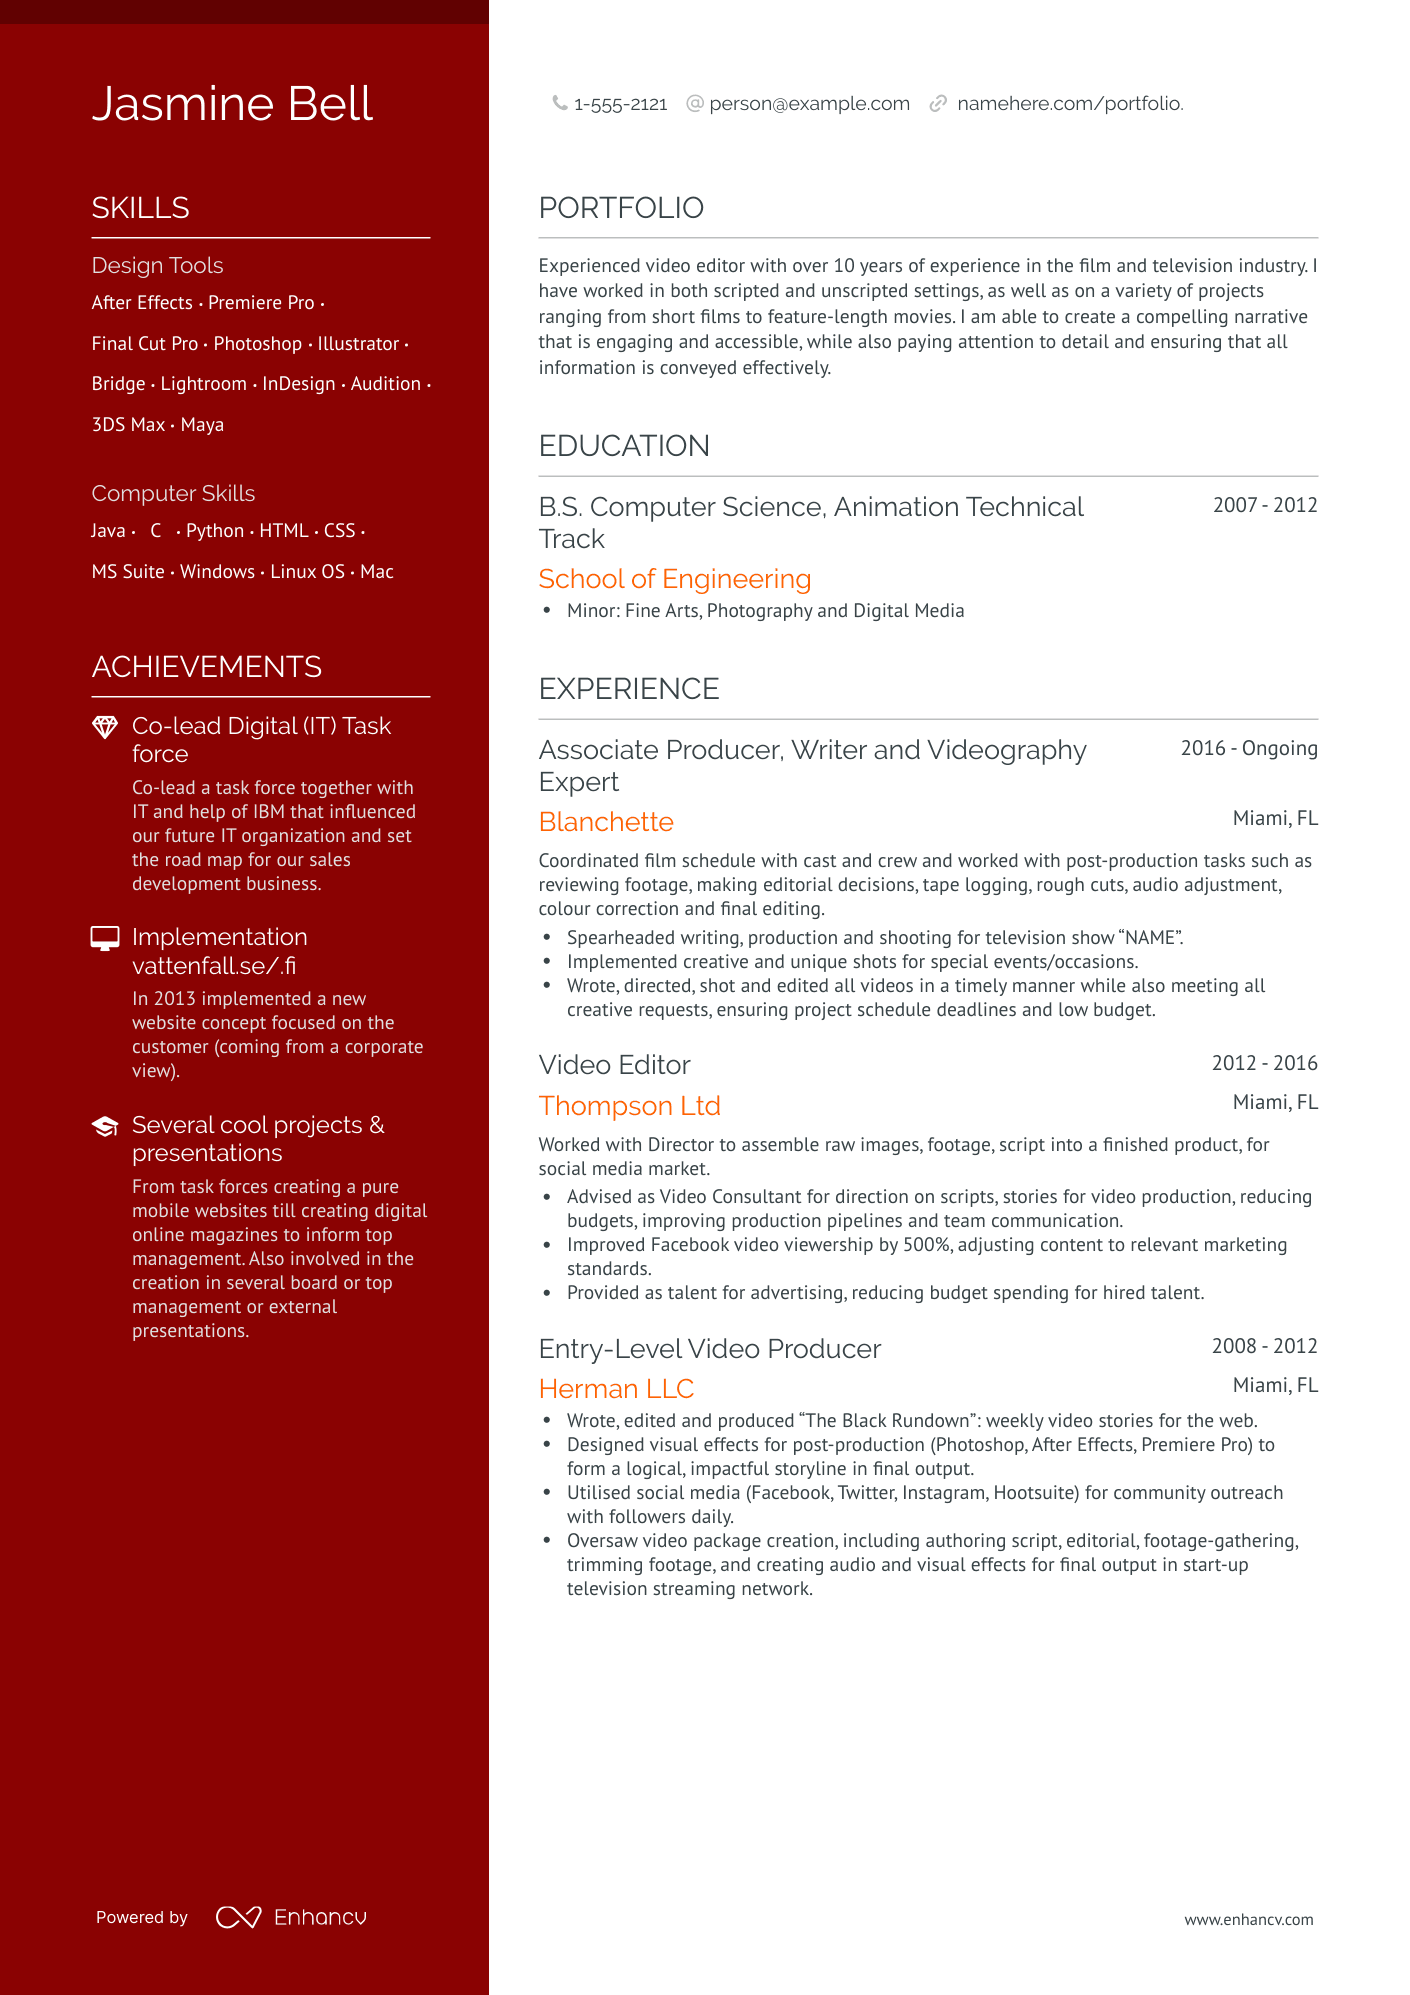 Polished Video Editor Resume Template